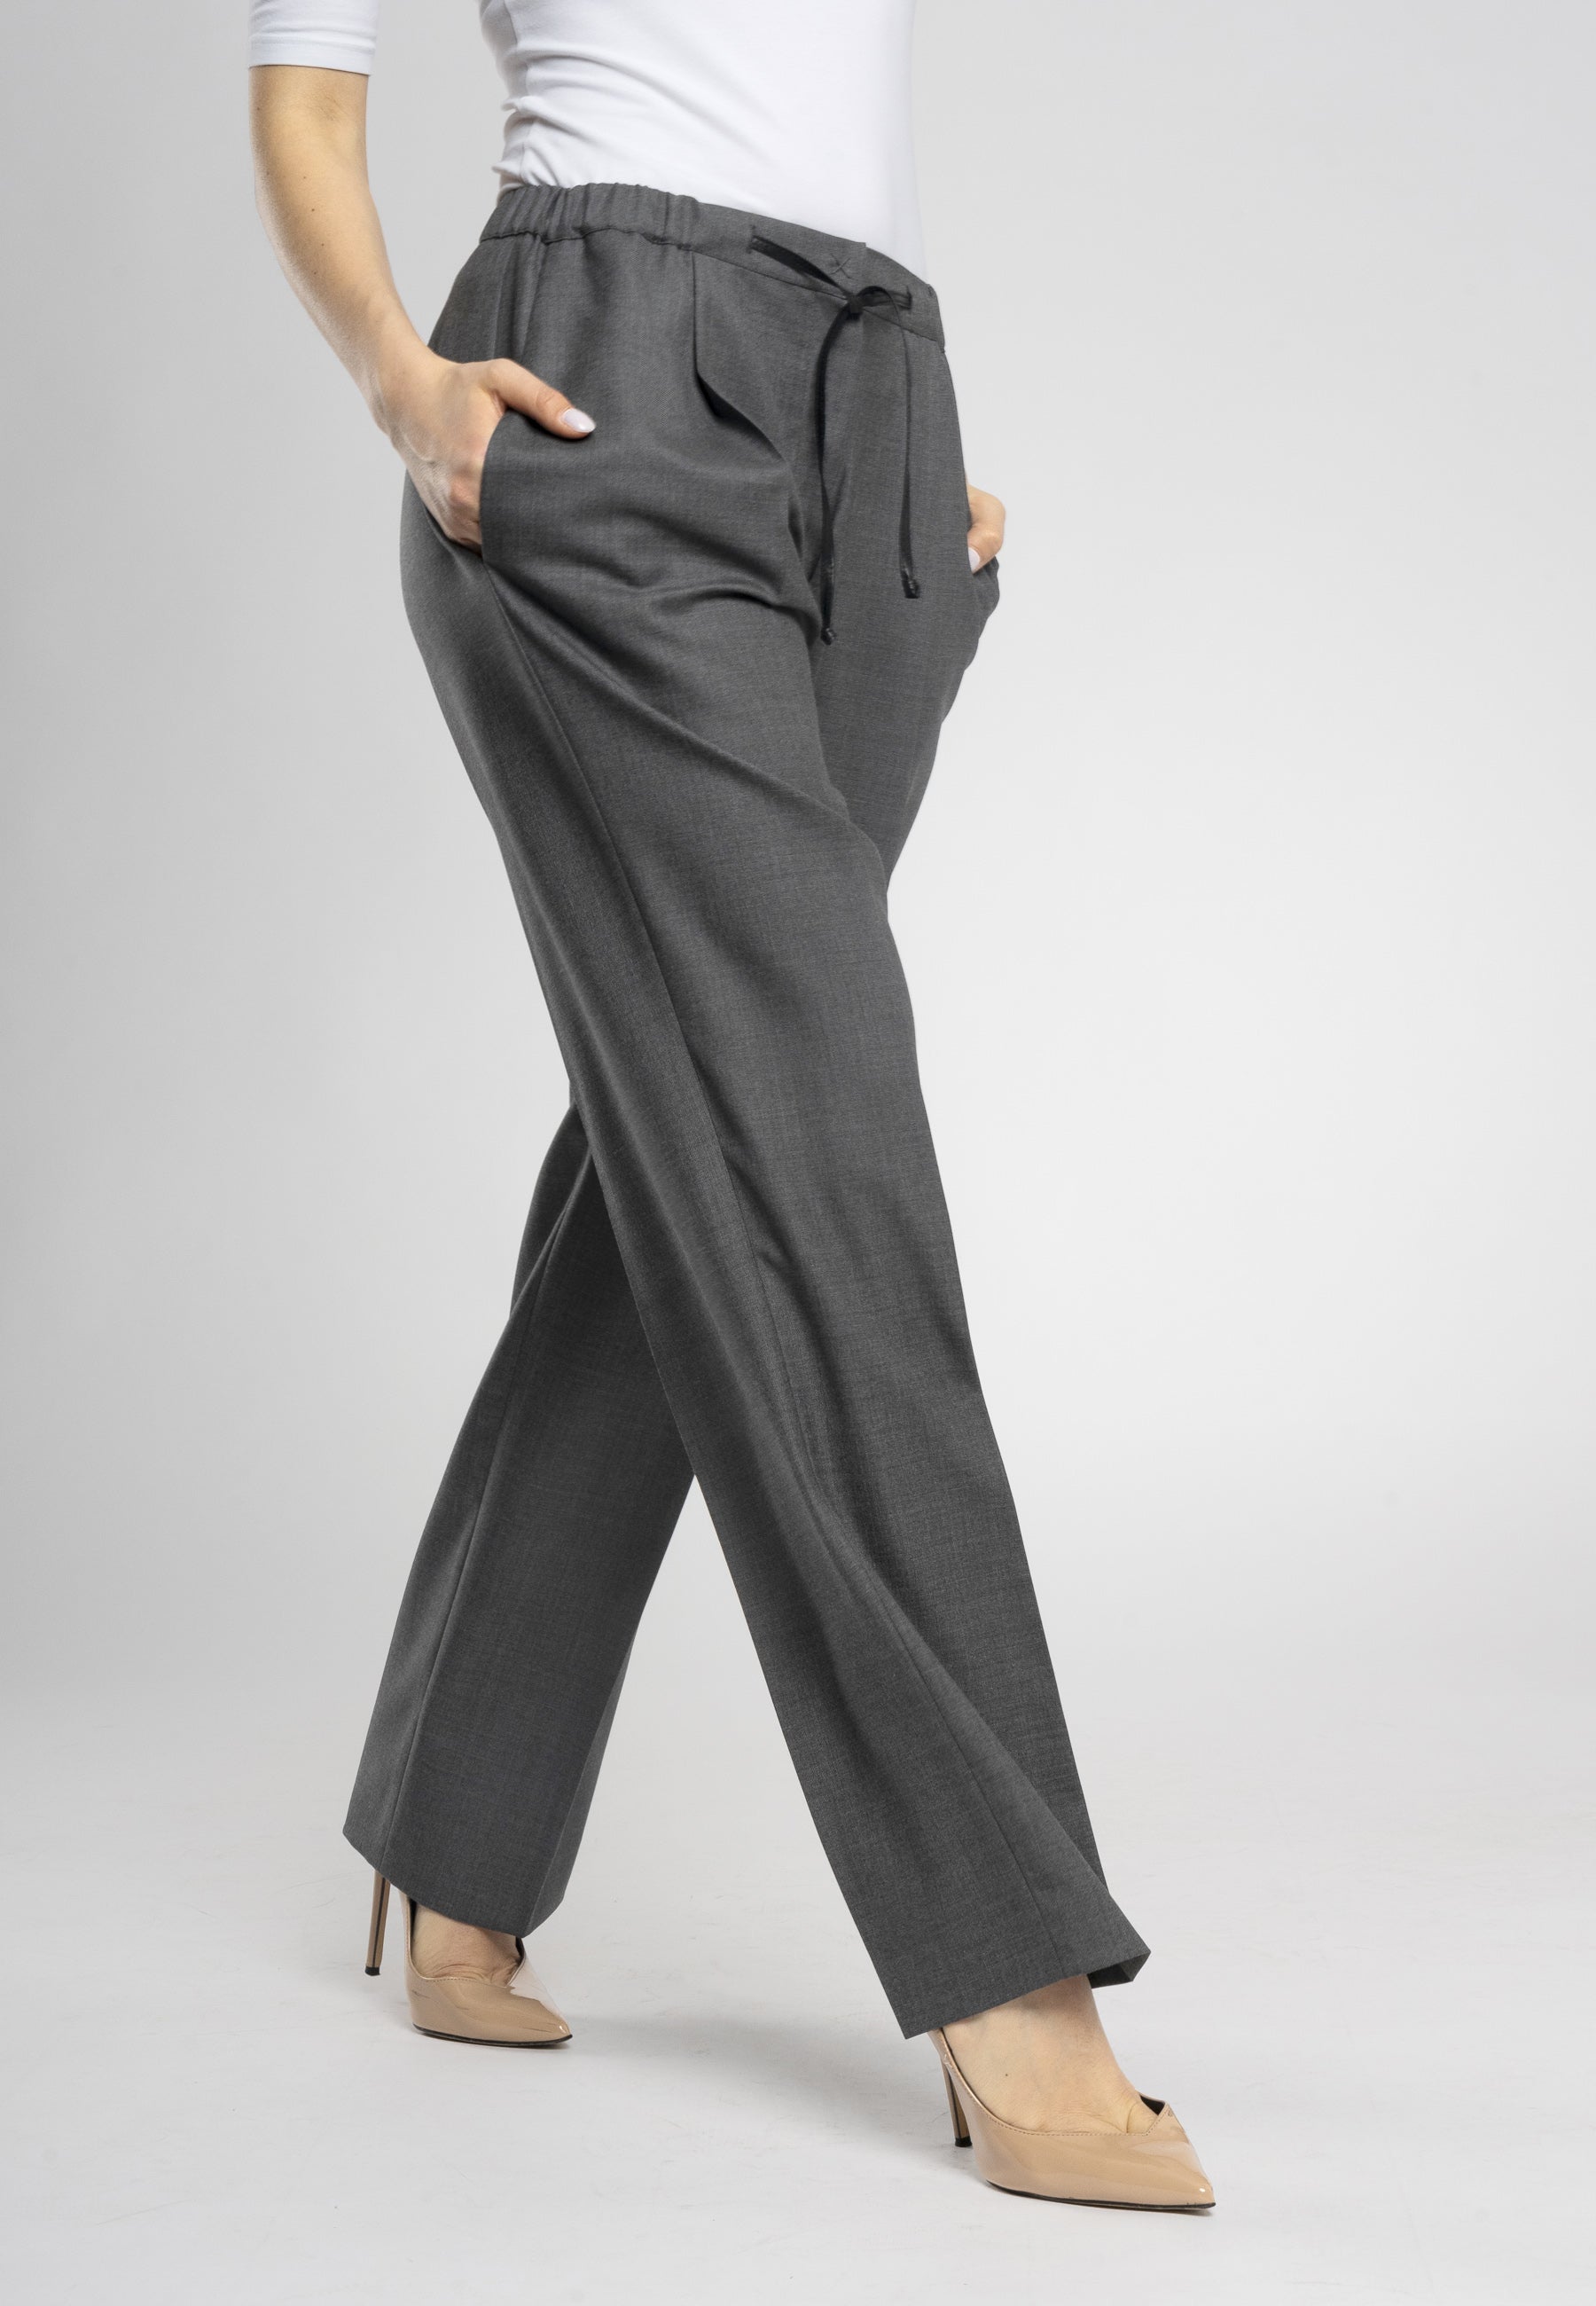 Italian wool trousers, drawstring waist trousers, high-quality wool pants, timeless design trousers, Italian style clothing